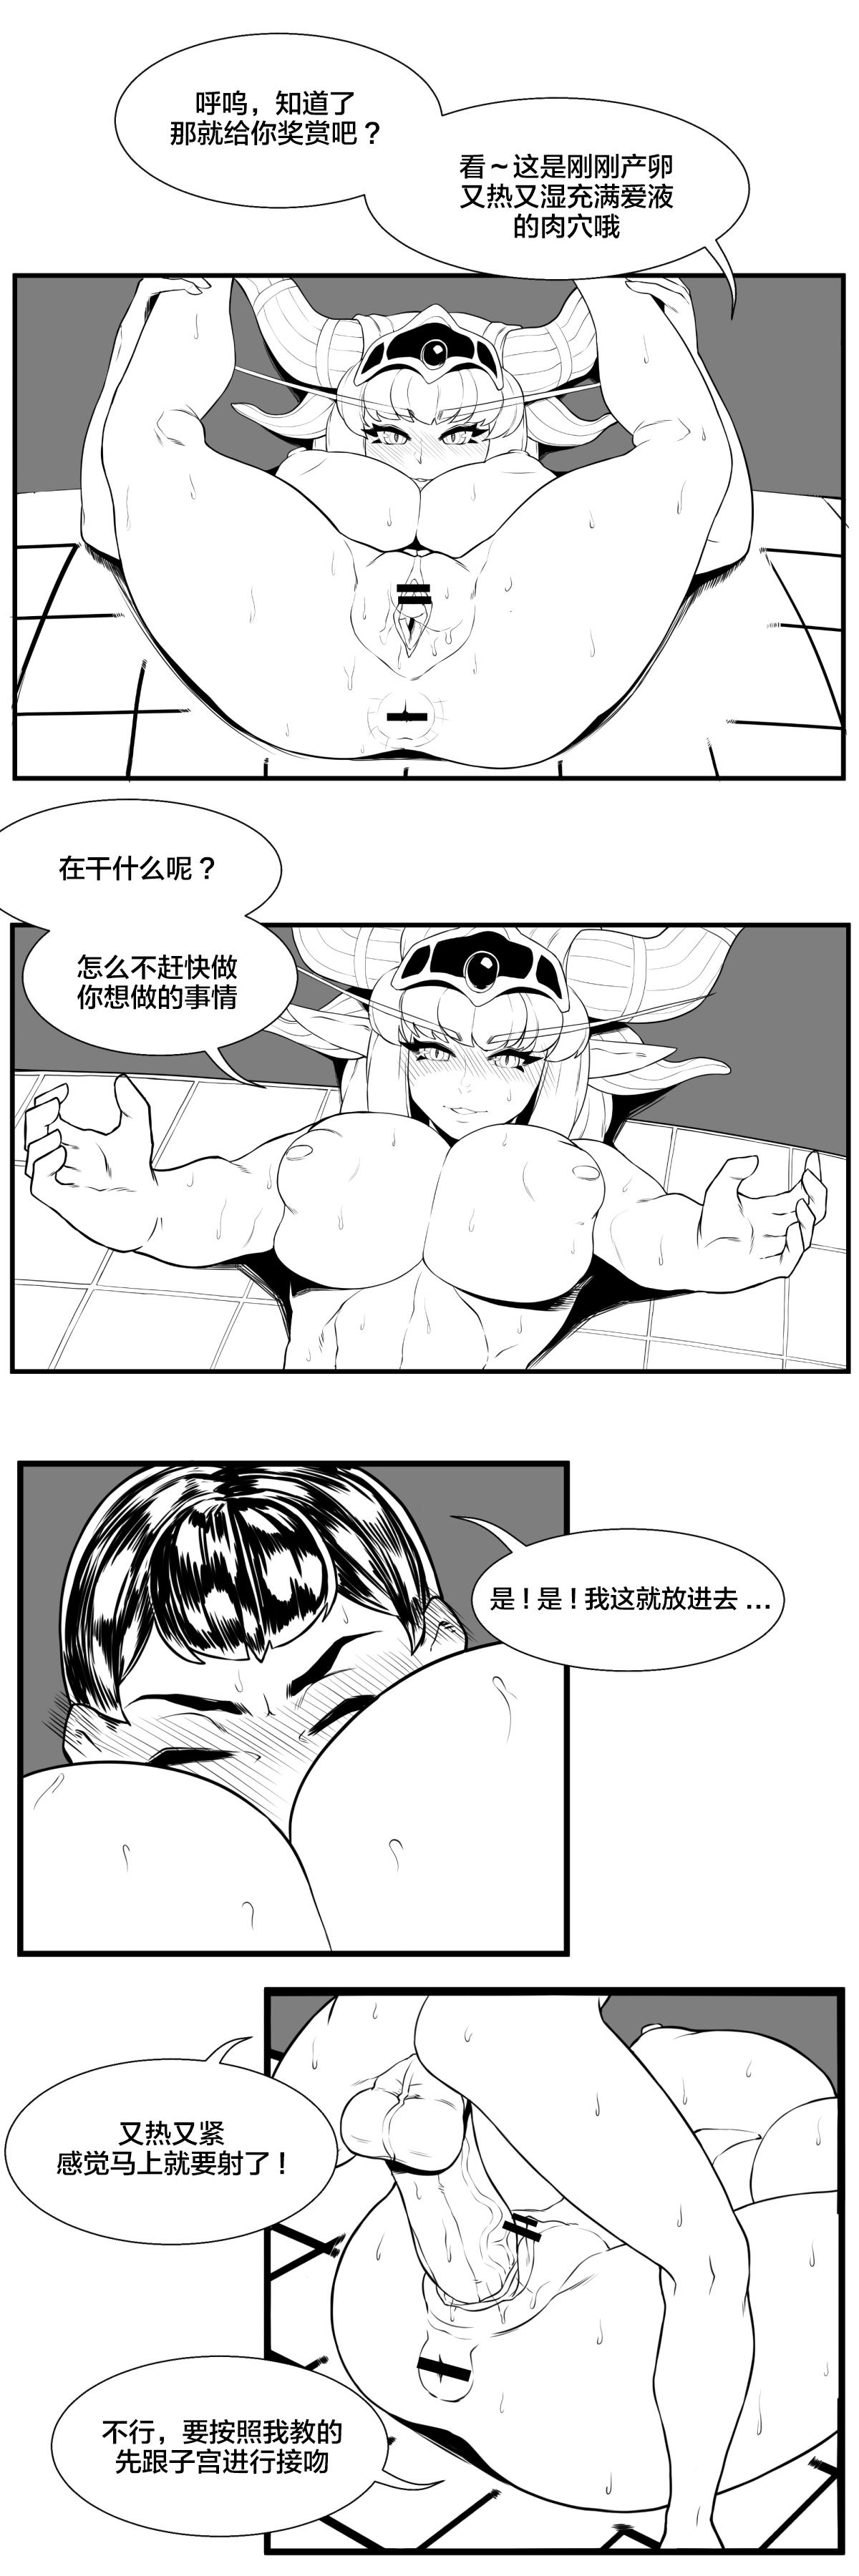 Hotwife 용엄마와 비밀상담 - World of warcraft Panty - Page 6